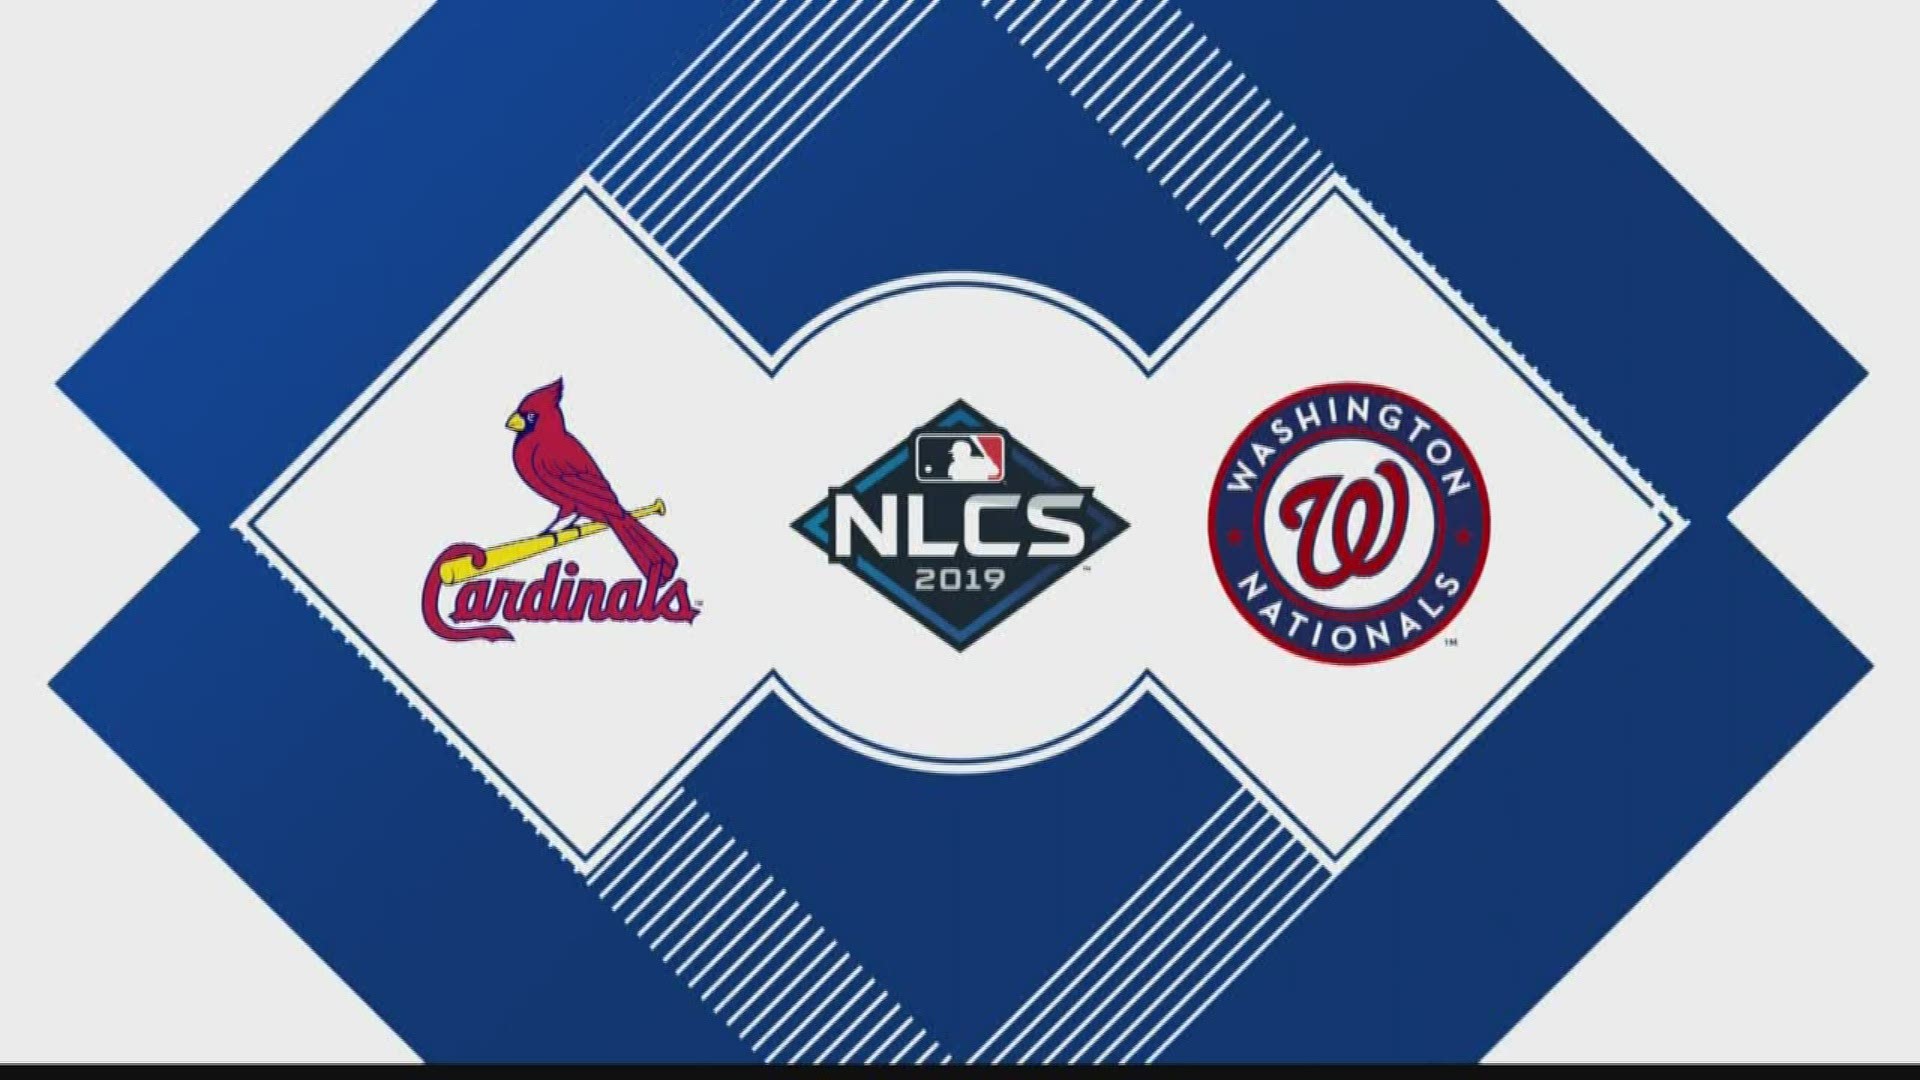 How to root on the Cards for NLCS Game 1